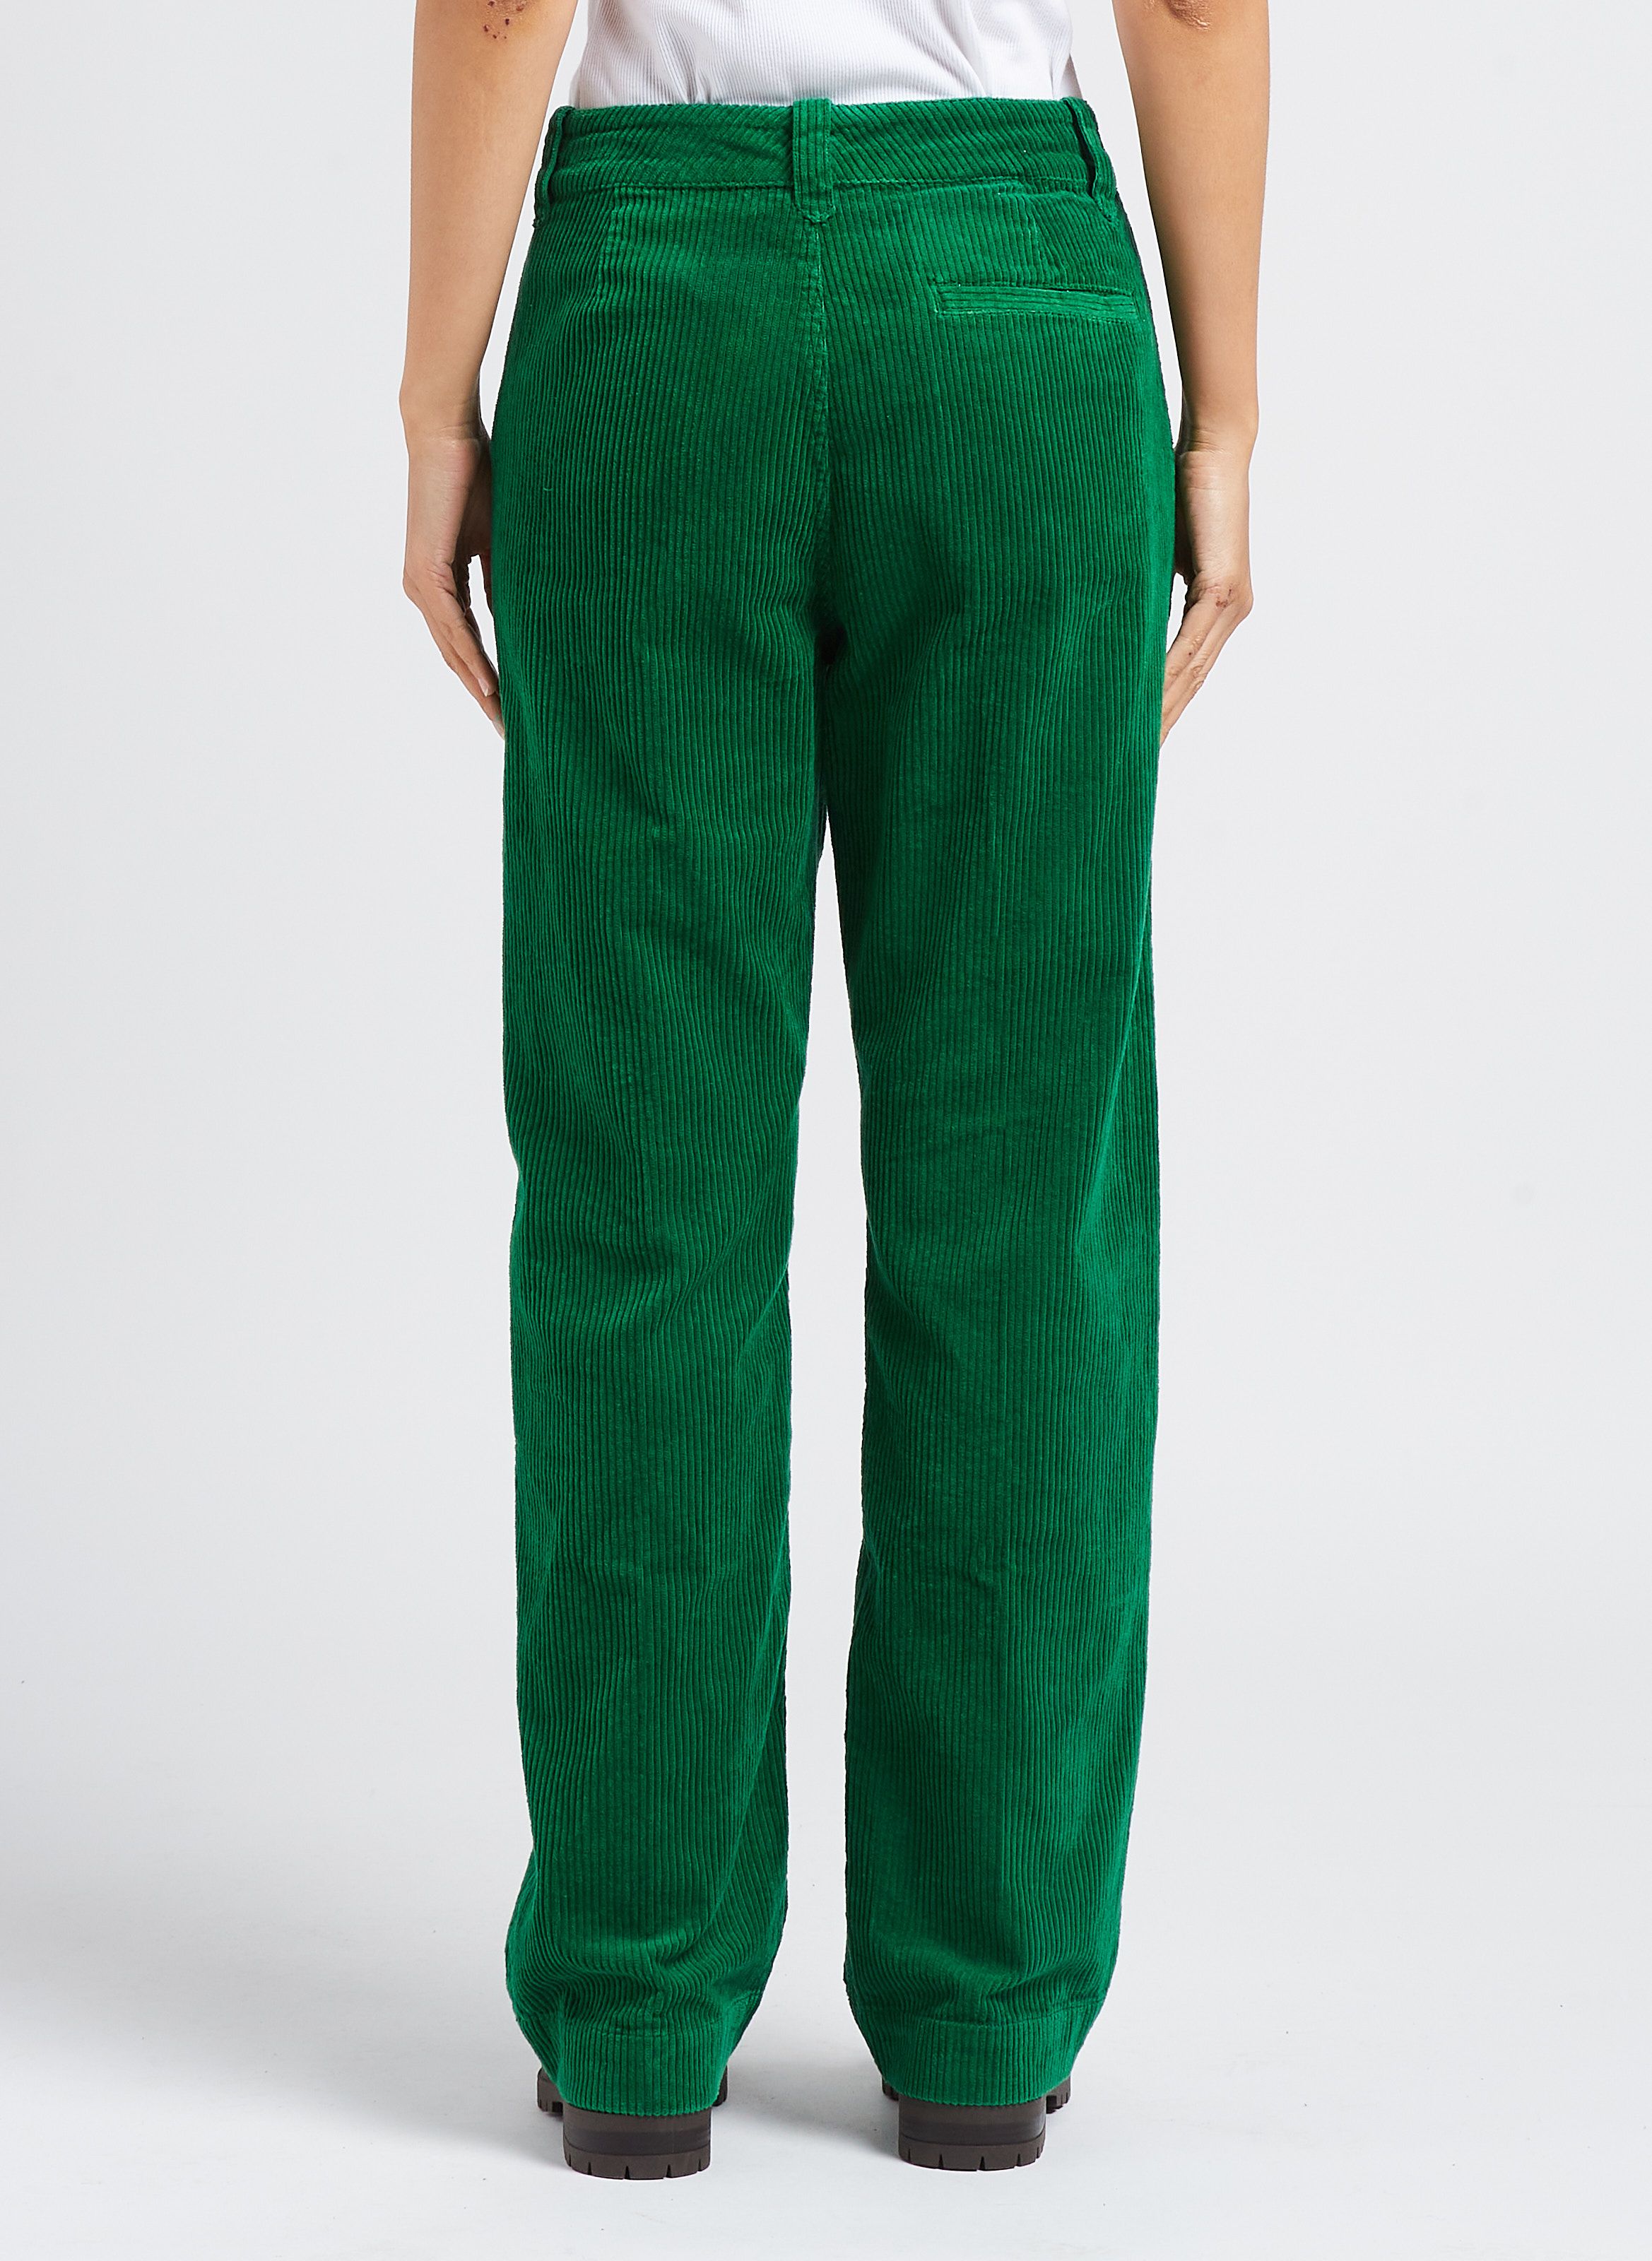 LAST size L NWT ZARA HIGH WAIST THICK CORDUROY TROUSERS PIPED GREEN  8543/723 | eBay